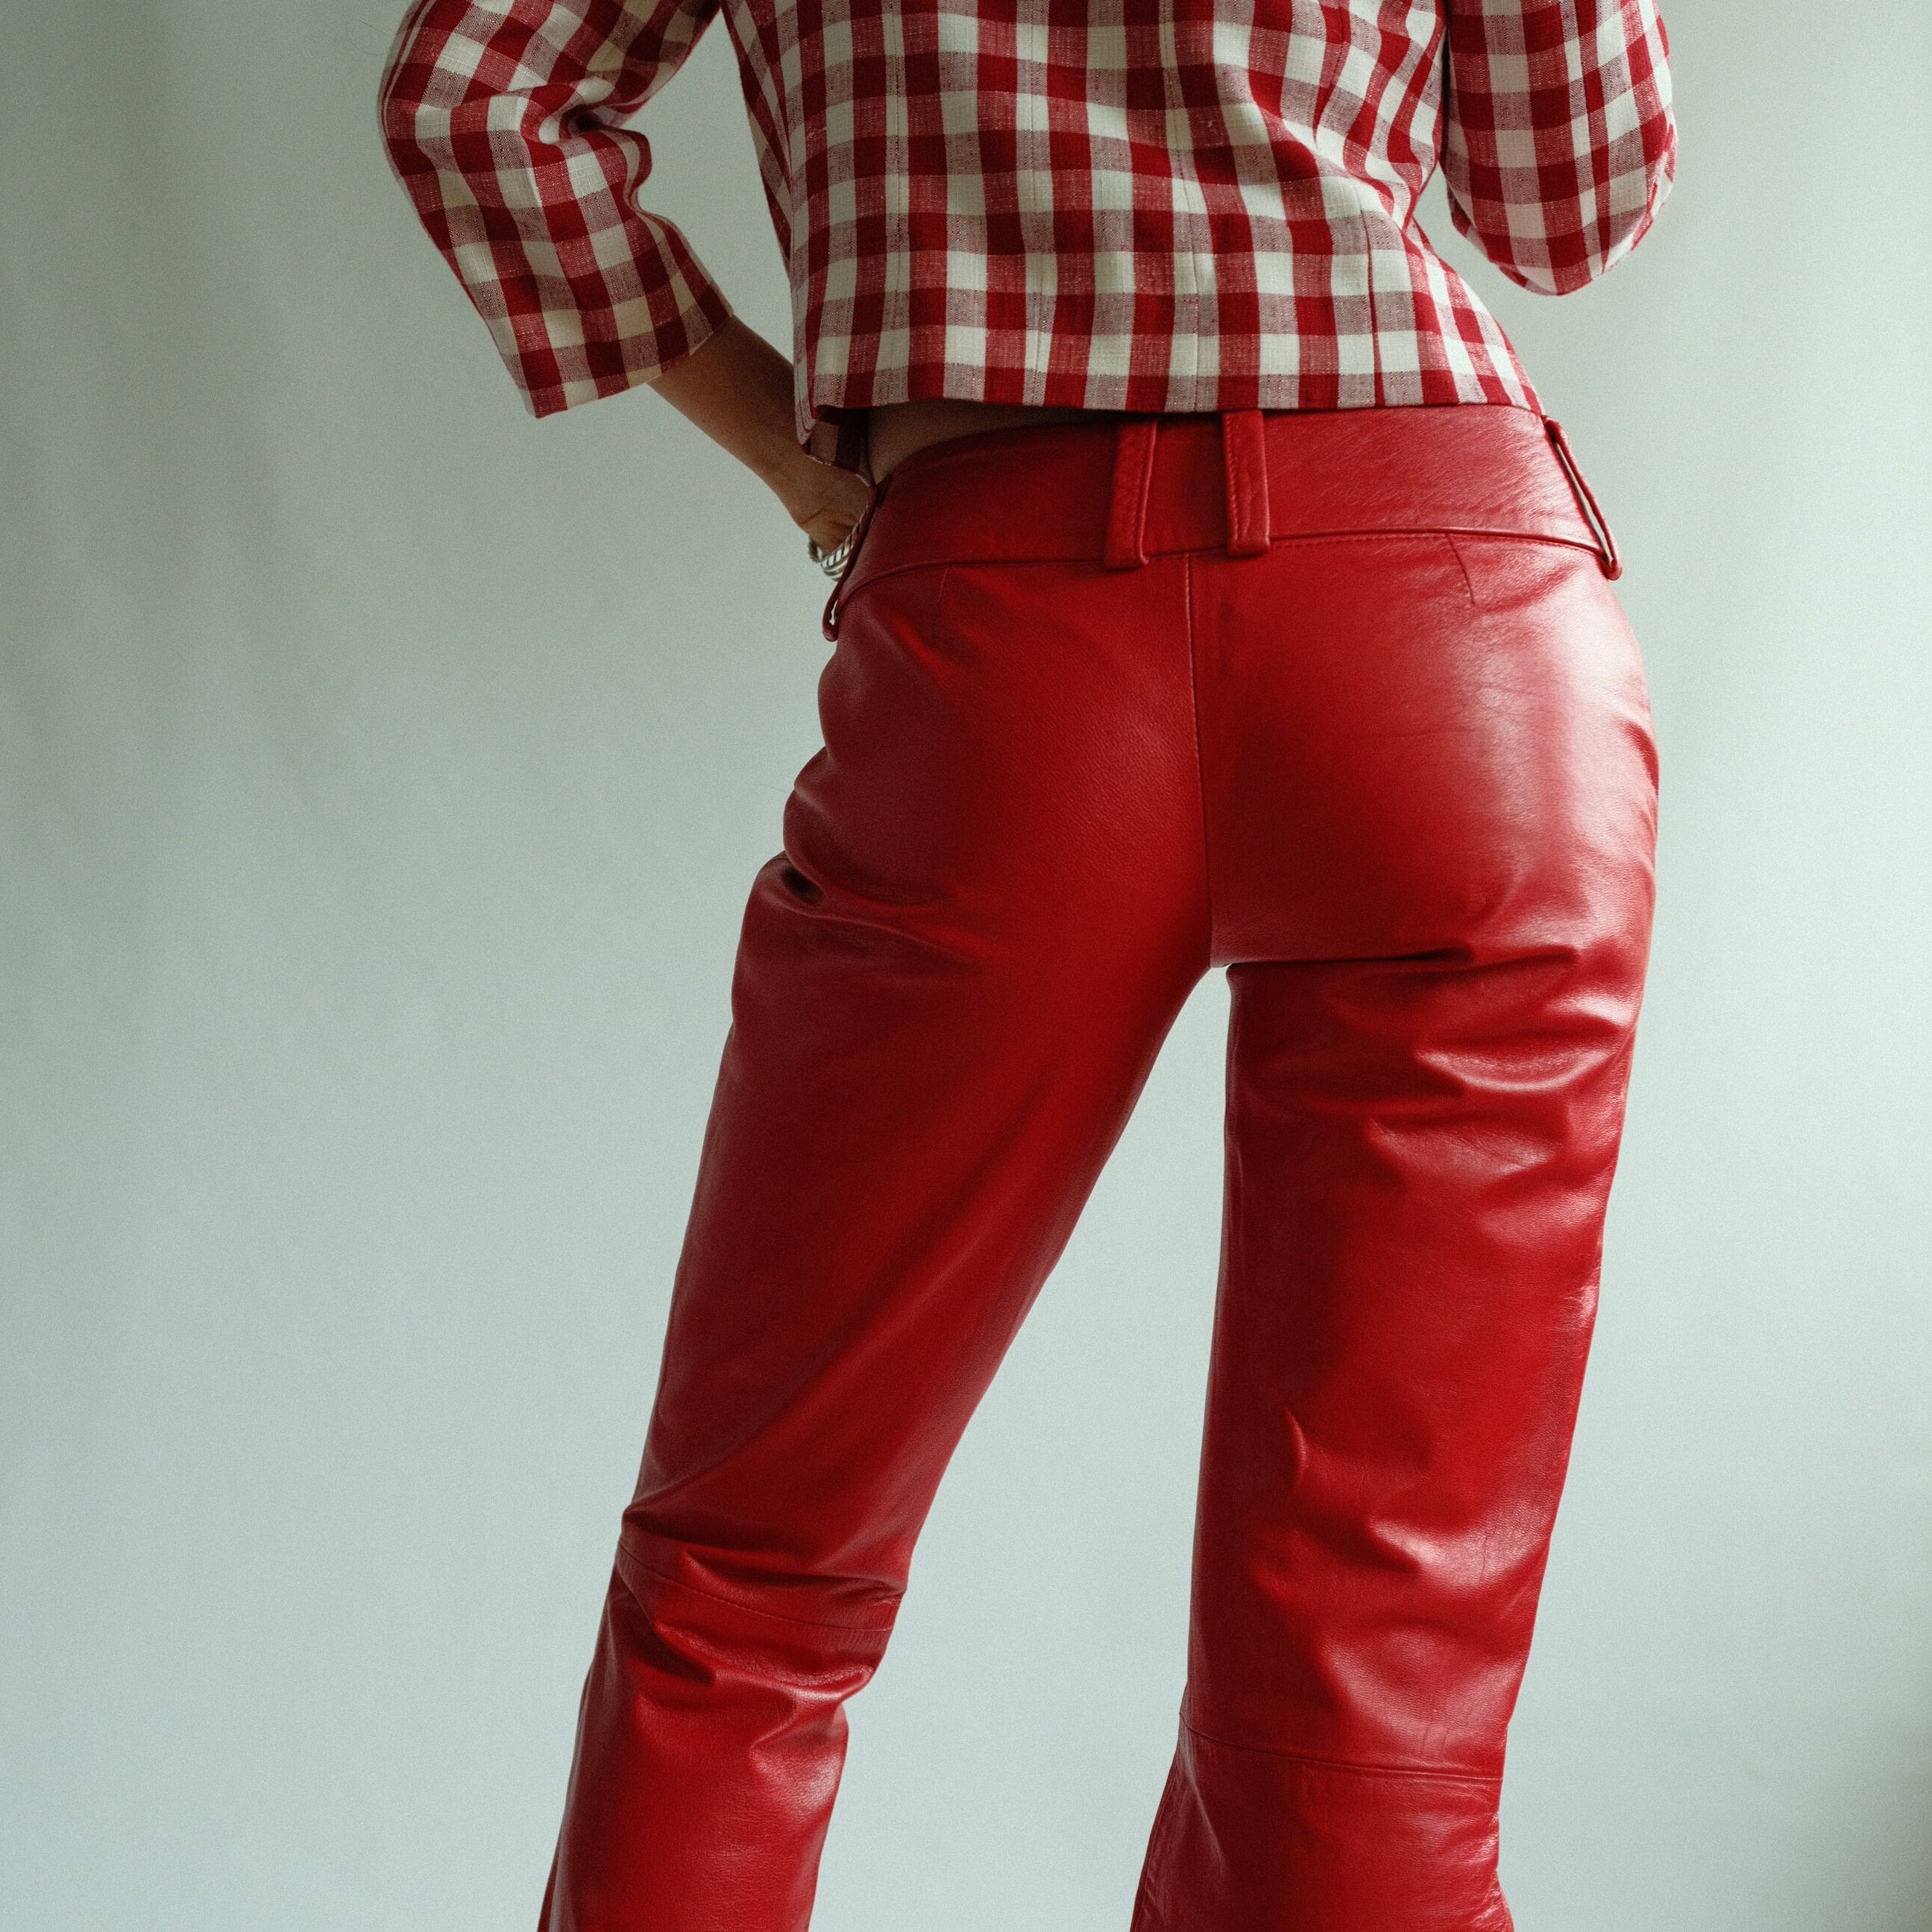 NAKD wide leg faux leather pants in red part of a set  ASOS